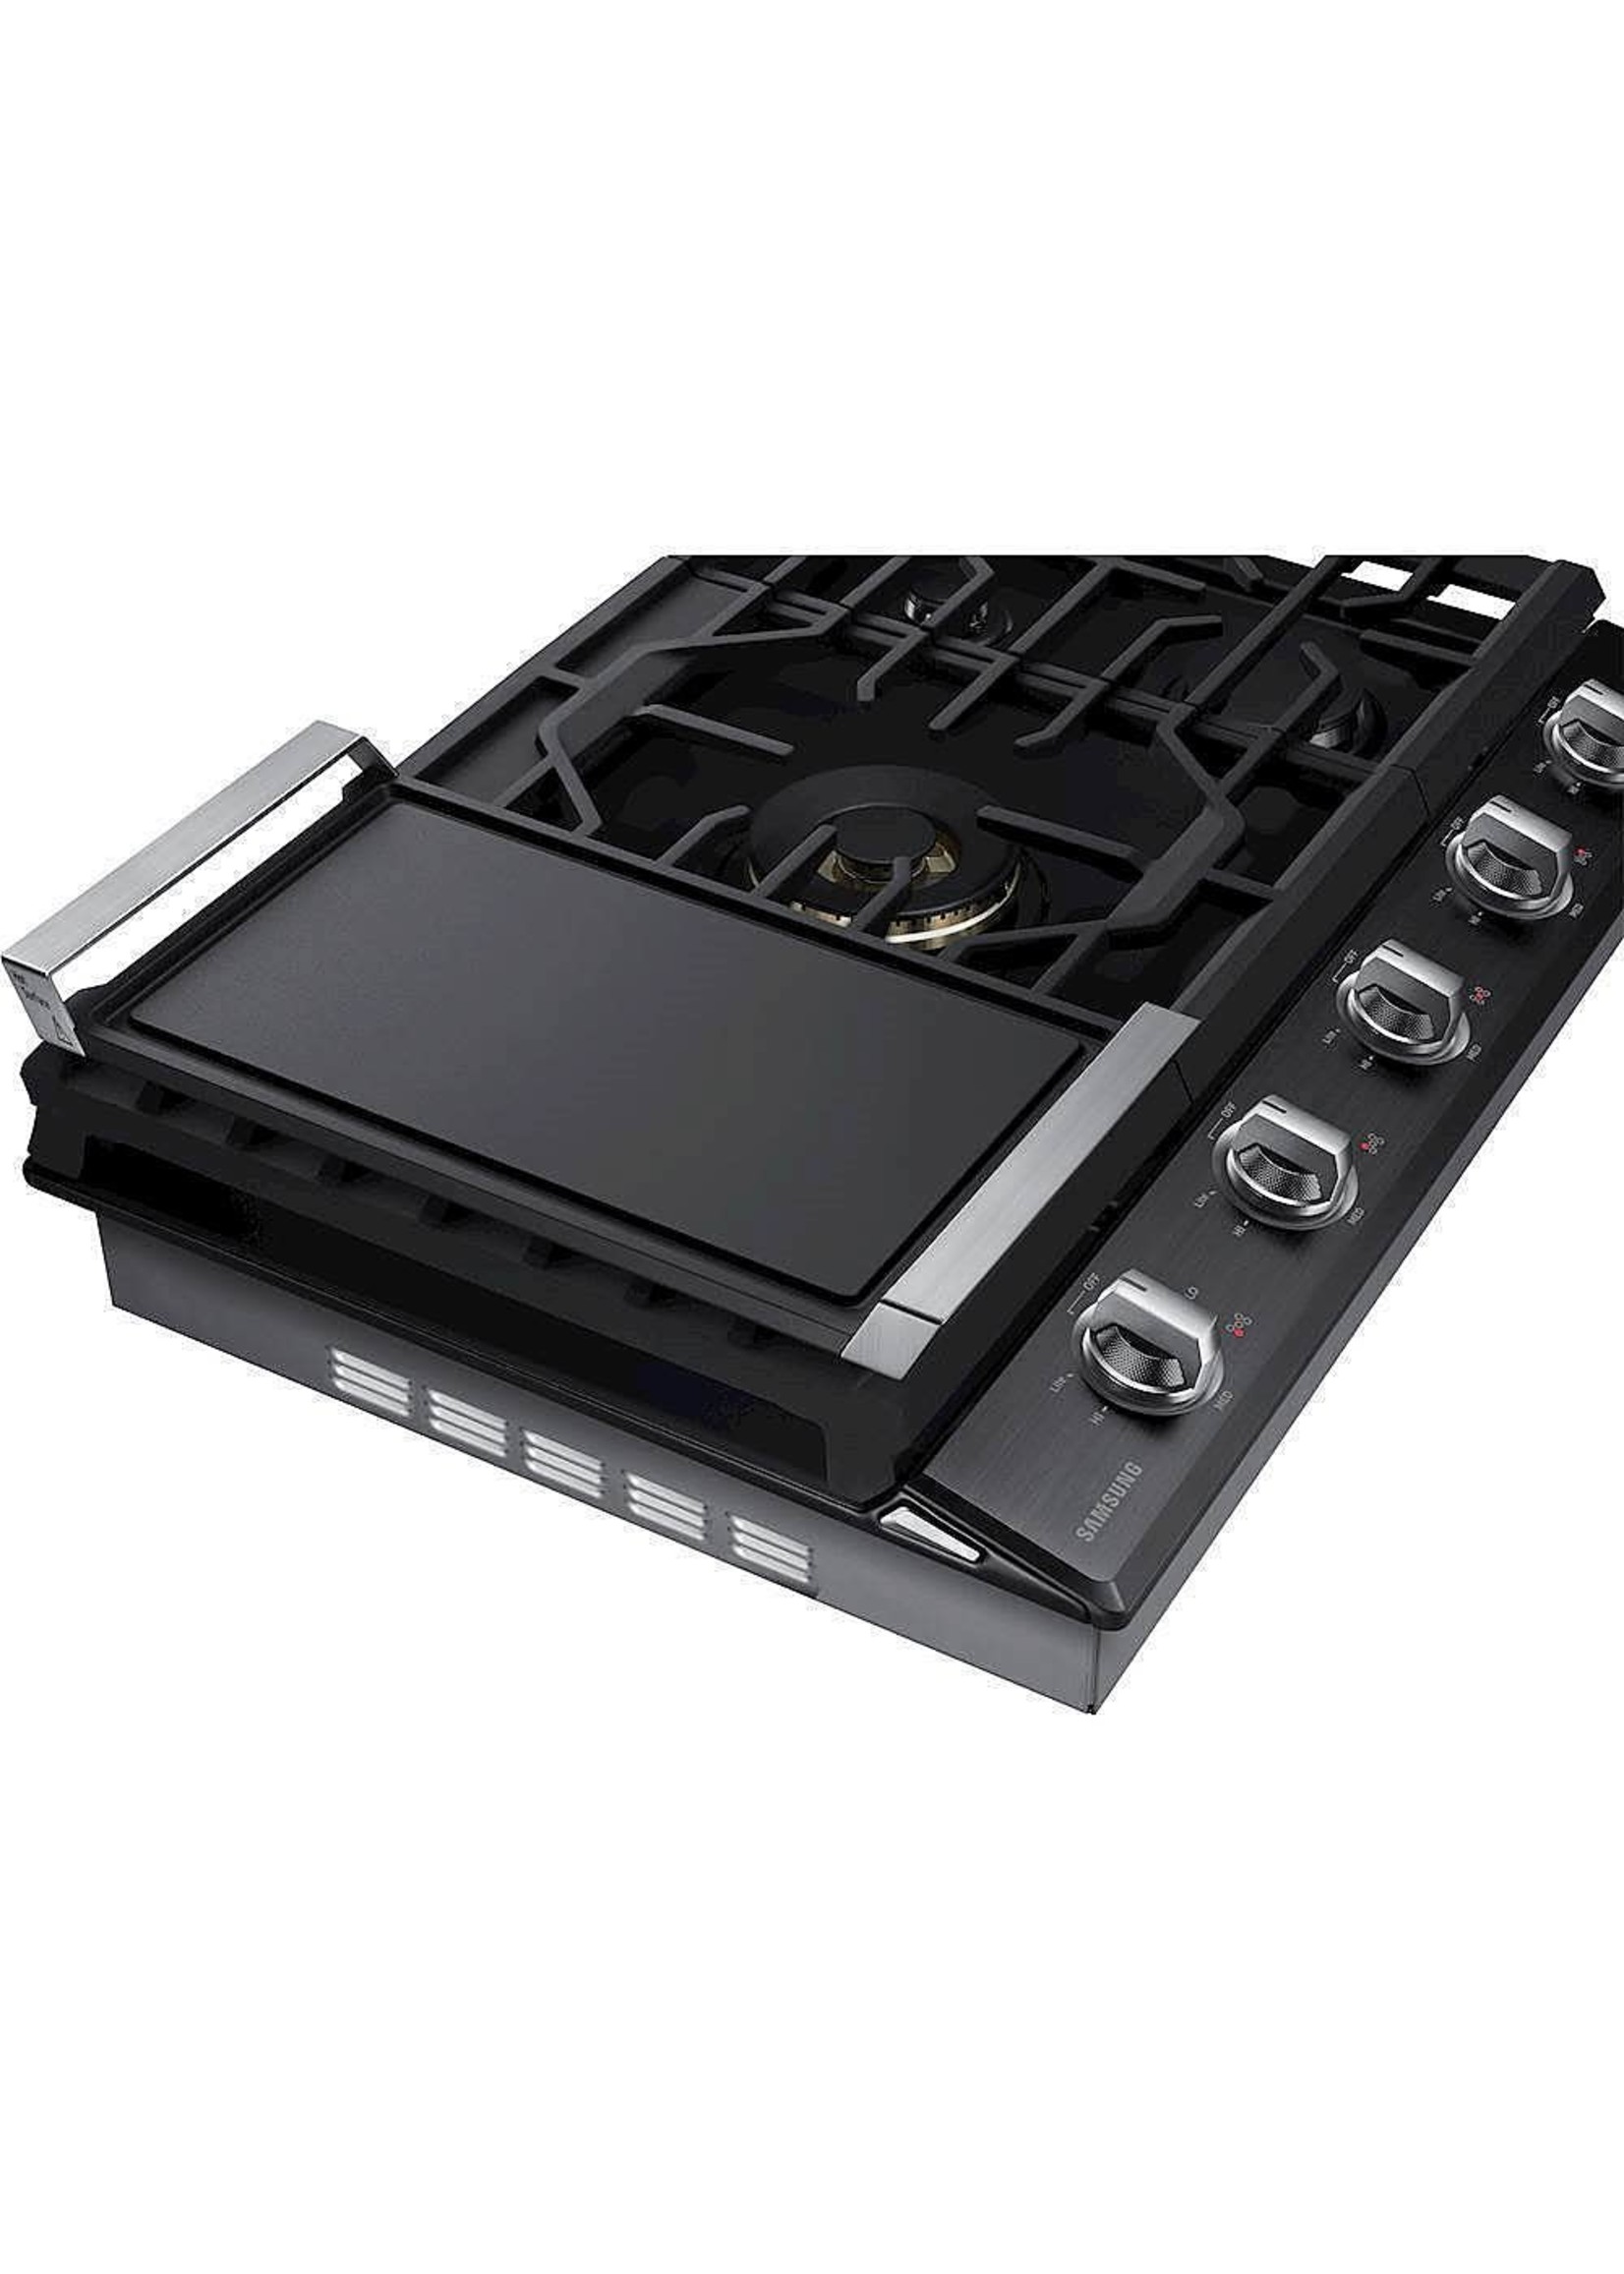 Samsung - 30" Built-In Gas Cooktop with WiFi and Dual Power Brass Burner - Black stainless steel